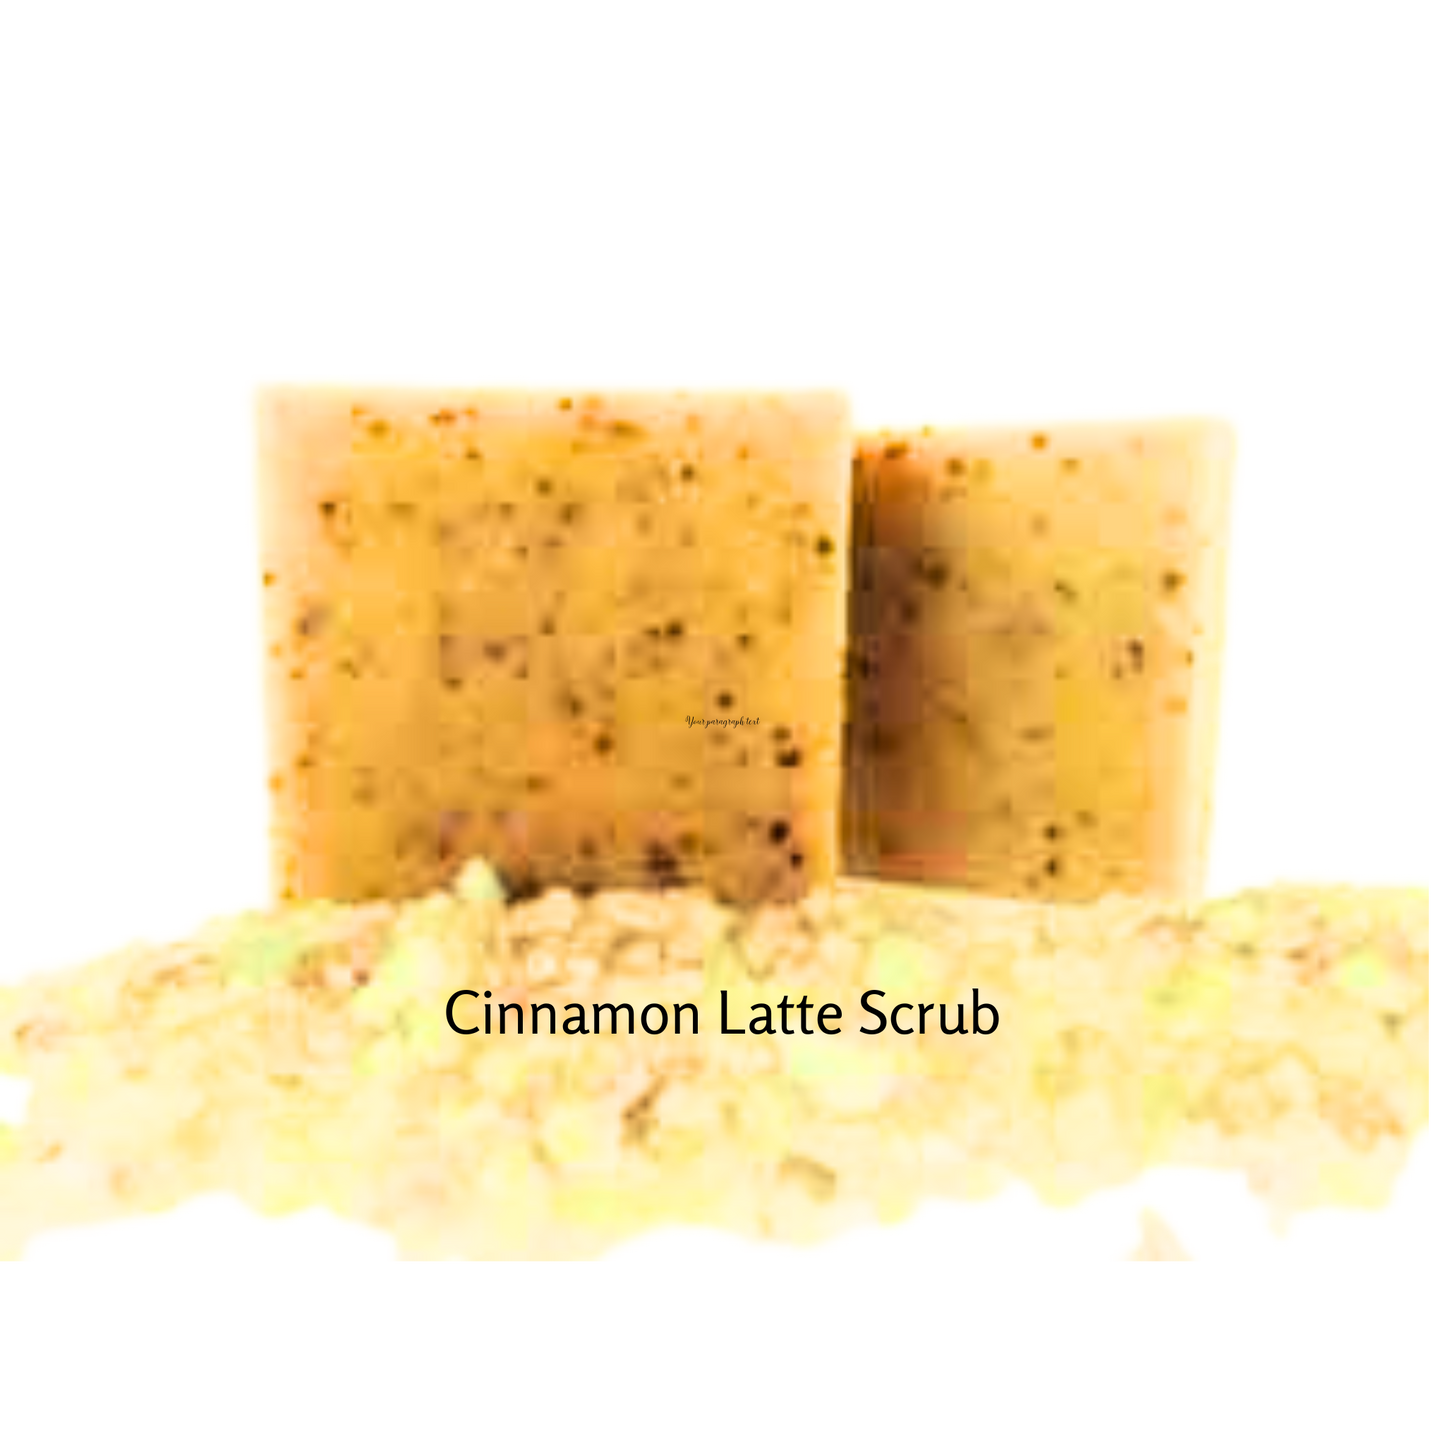 Lively, fresh cinnamon fragrance surprisingly compliments our handmade Cinnamon Latte soap bar. Antimicrobial properties of the cinnamon known to kill bacteria is what makes this soap viable. You are only a few clicks away from scrubbing the dirt of your skin, while providing antibacterial benefits to help secure a healthy life style.